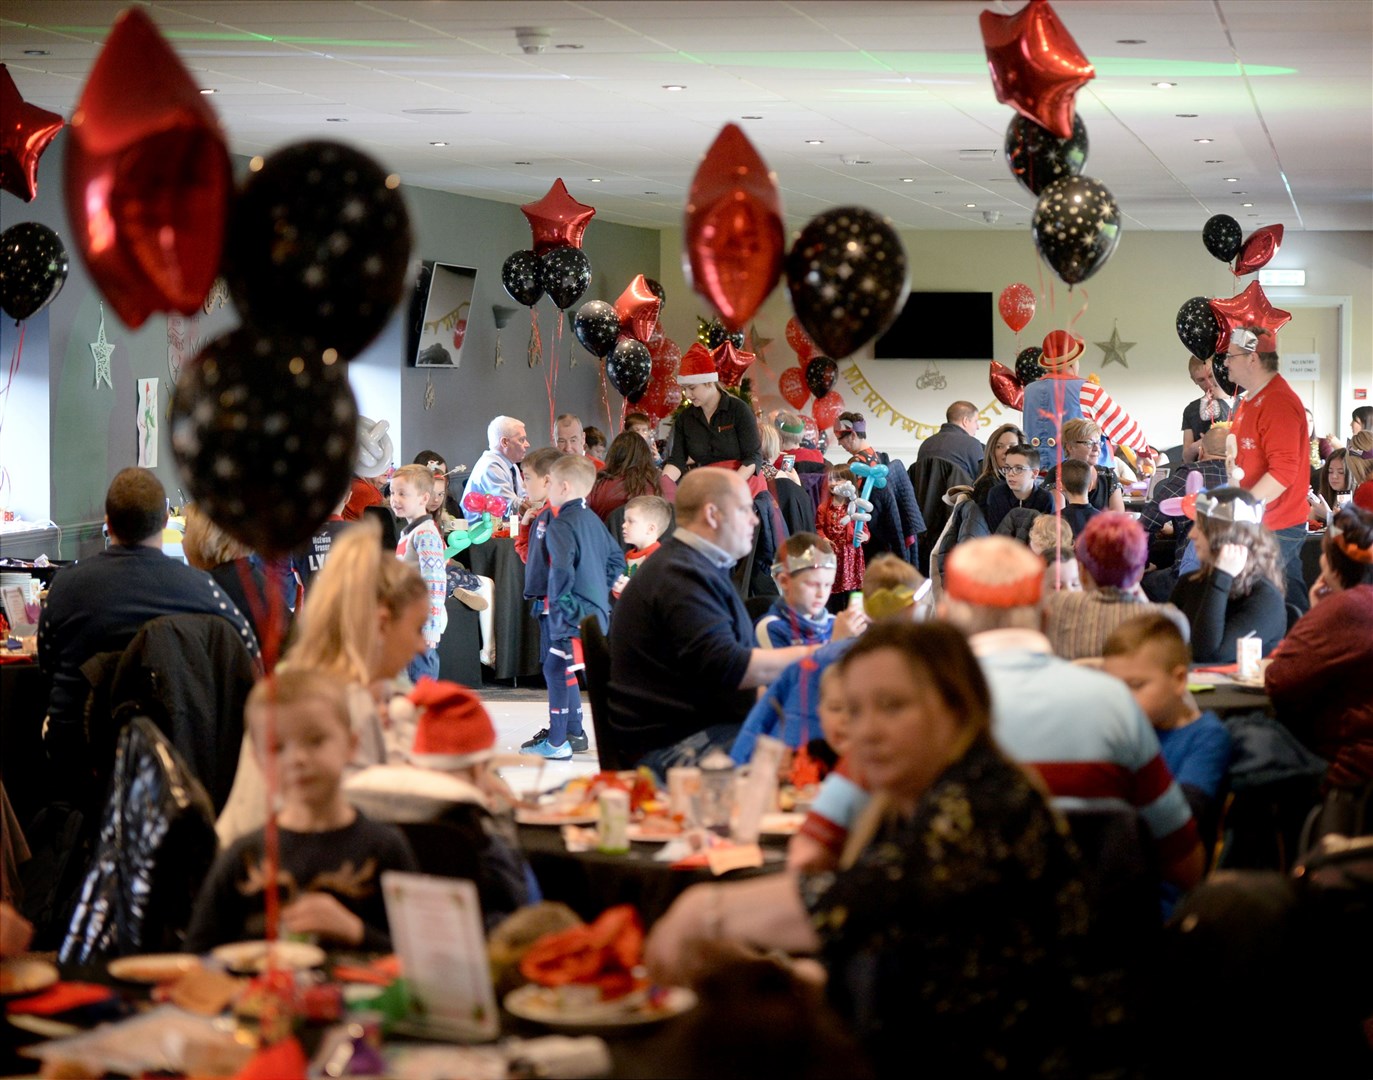 Ross County Brunch with Santa 2019..The room was decorated with Christmas decorations and balloons..Picture: James MacKenzie..